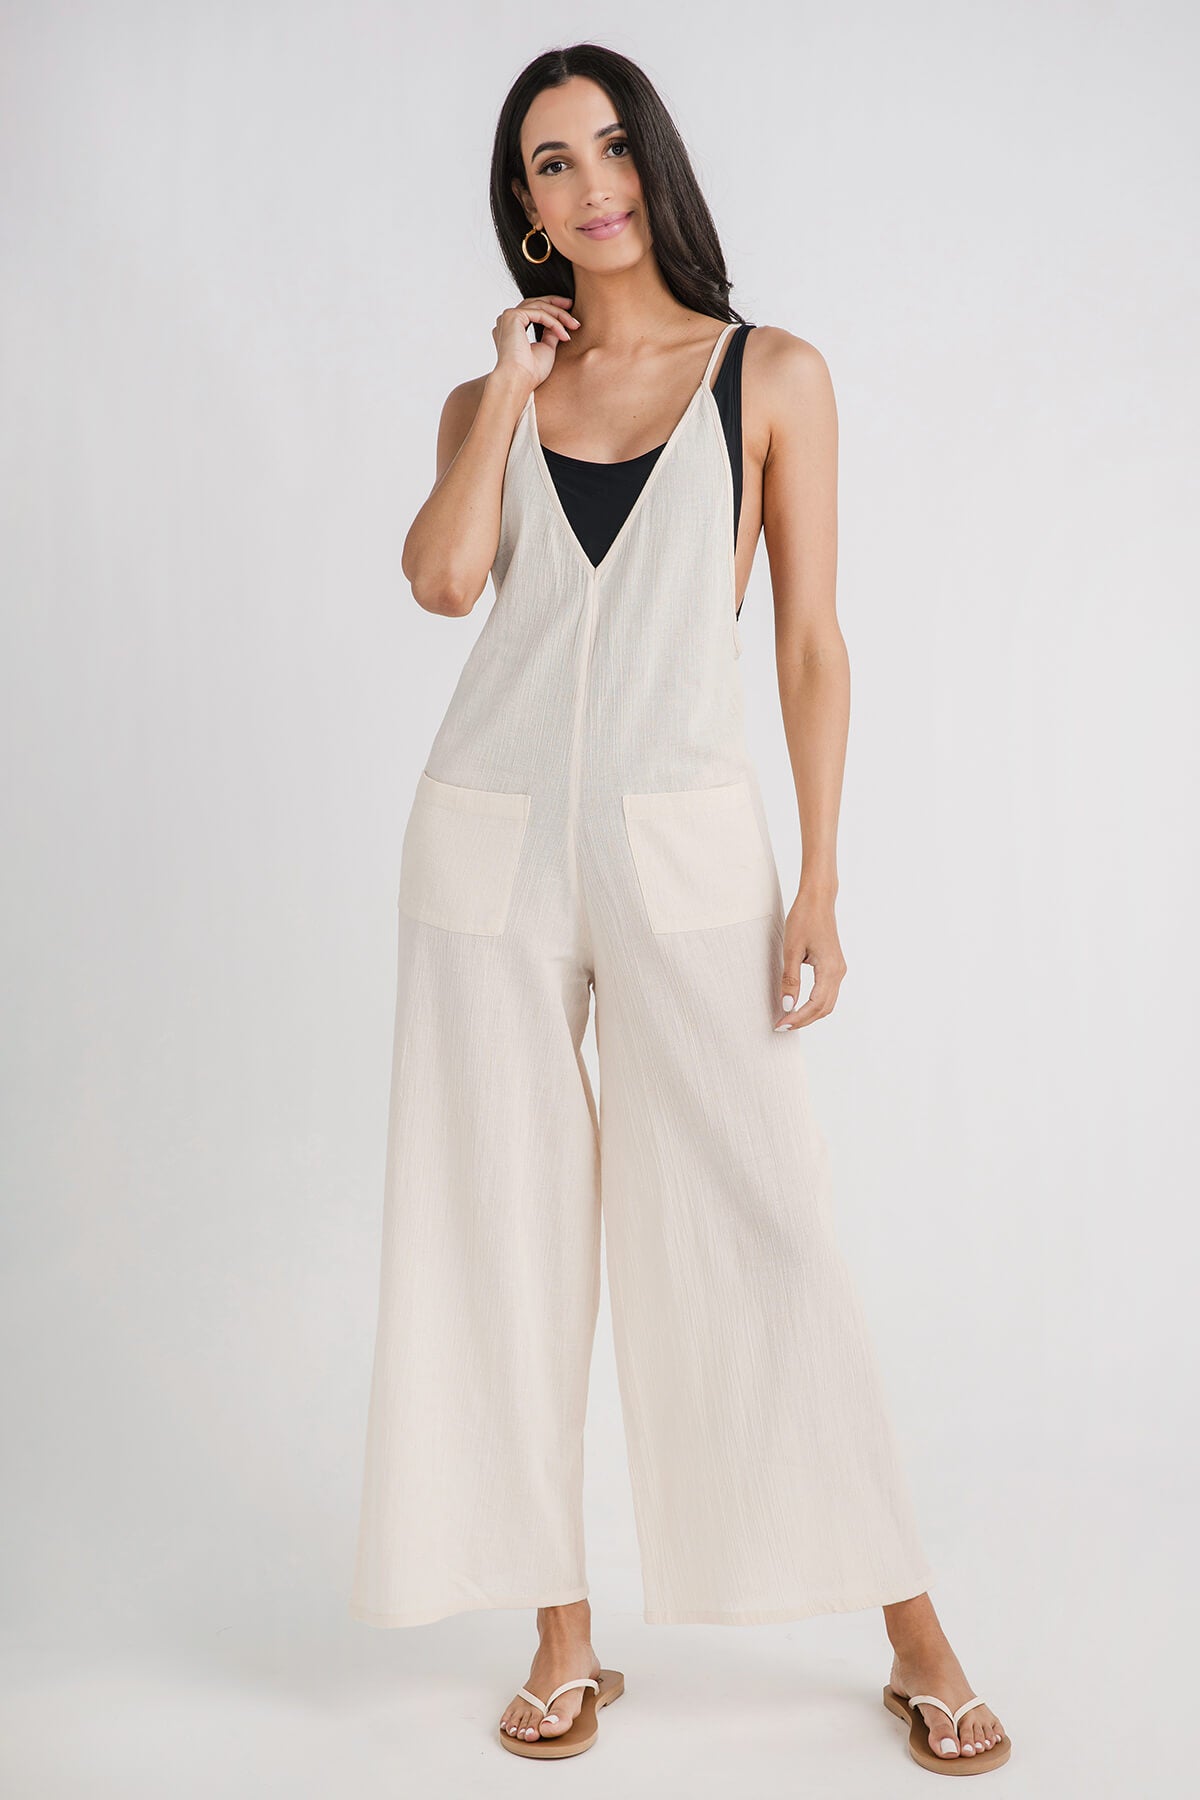 Elan Jumpsuits & Rompers for Women